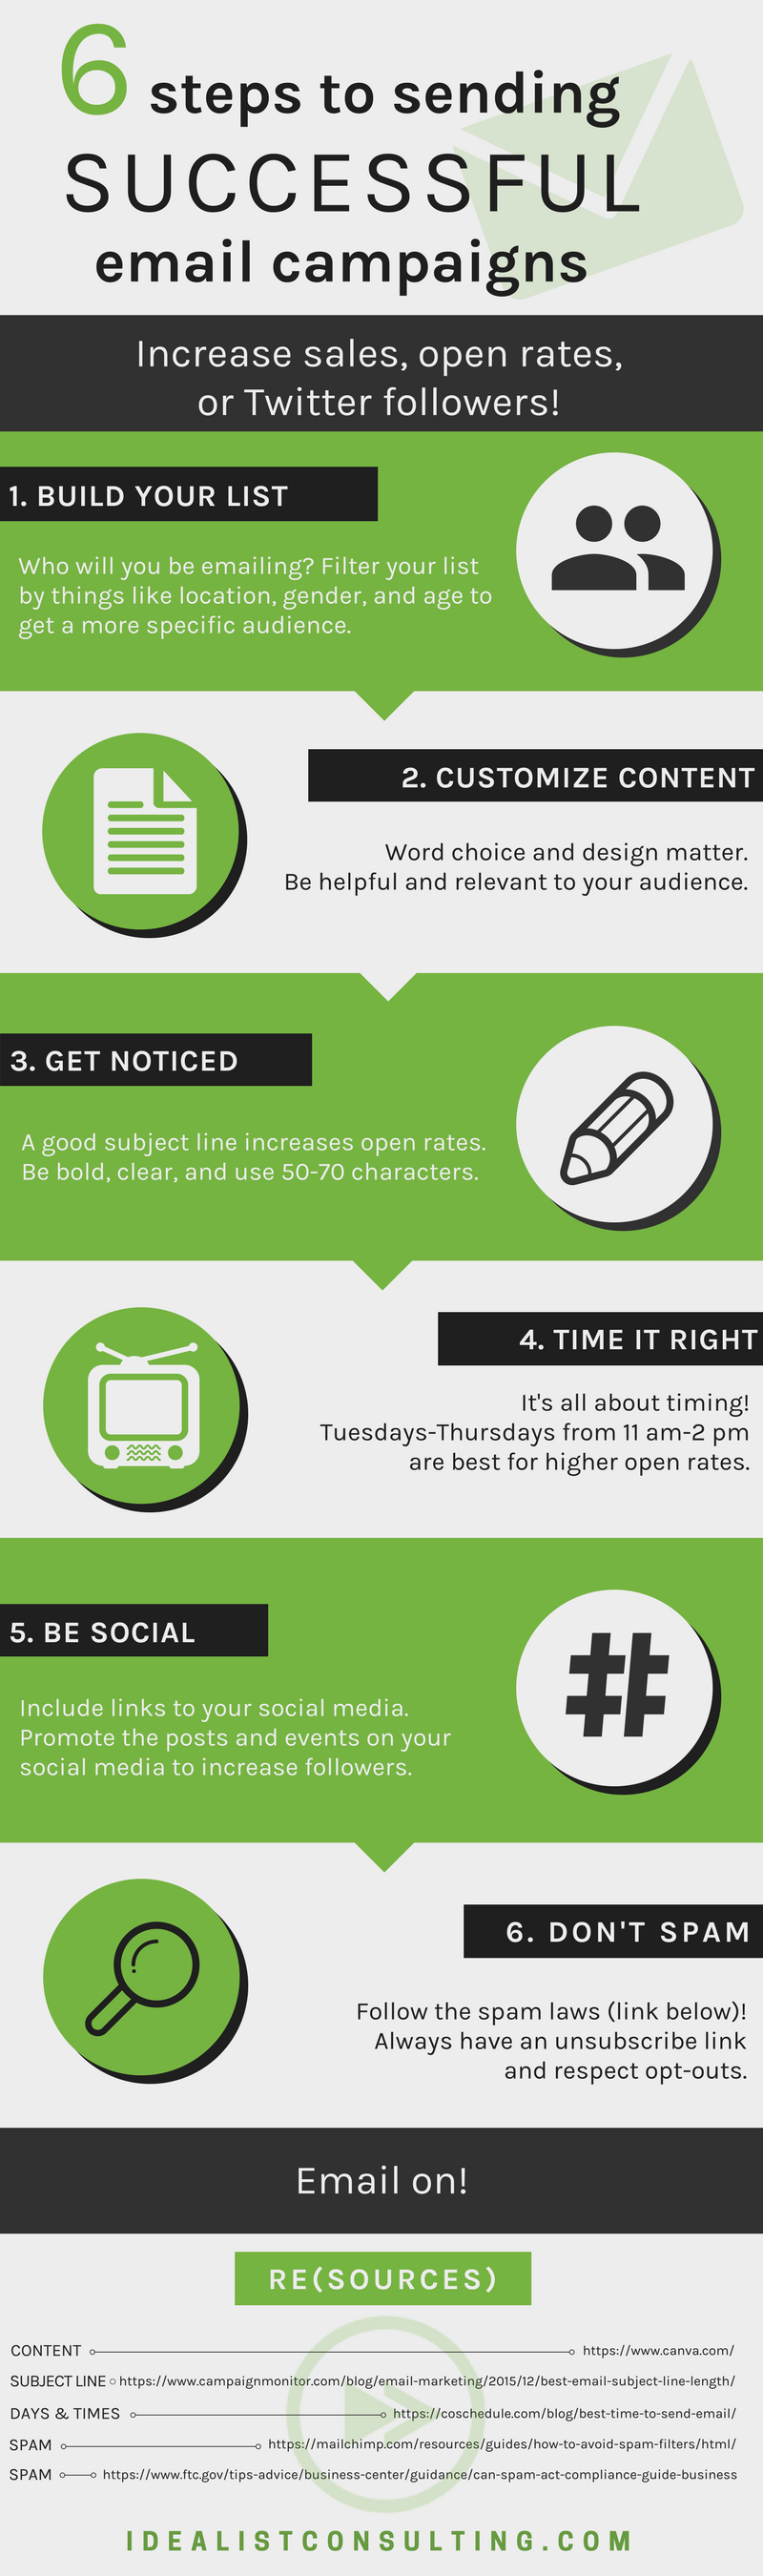 http://www.idealistconsulting.com/sites/default/files/6_tips_for_email_campaigns_infographic_2017.png